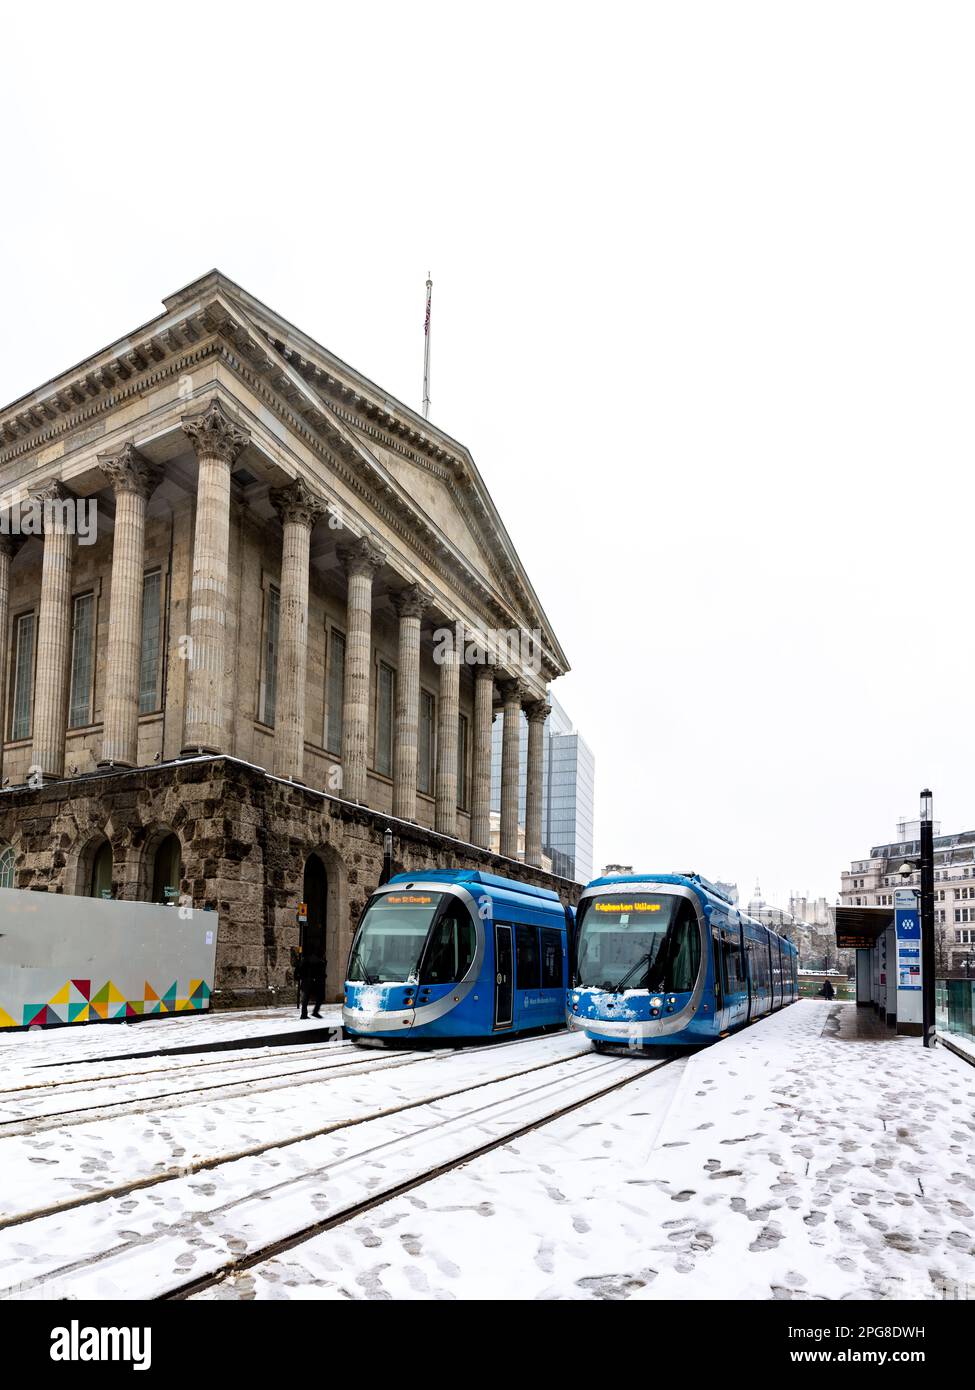 BIRMINGHAM, UK - MARCH 9, 2023.  West Midlands Trams at Birmingham Town Hall building during Winter with heavy snow on the ground disrupting traffic Stock Photo